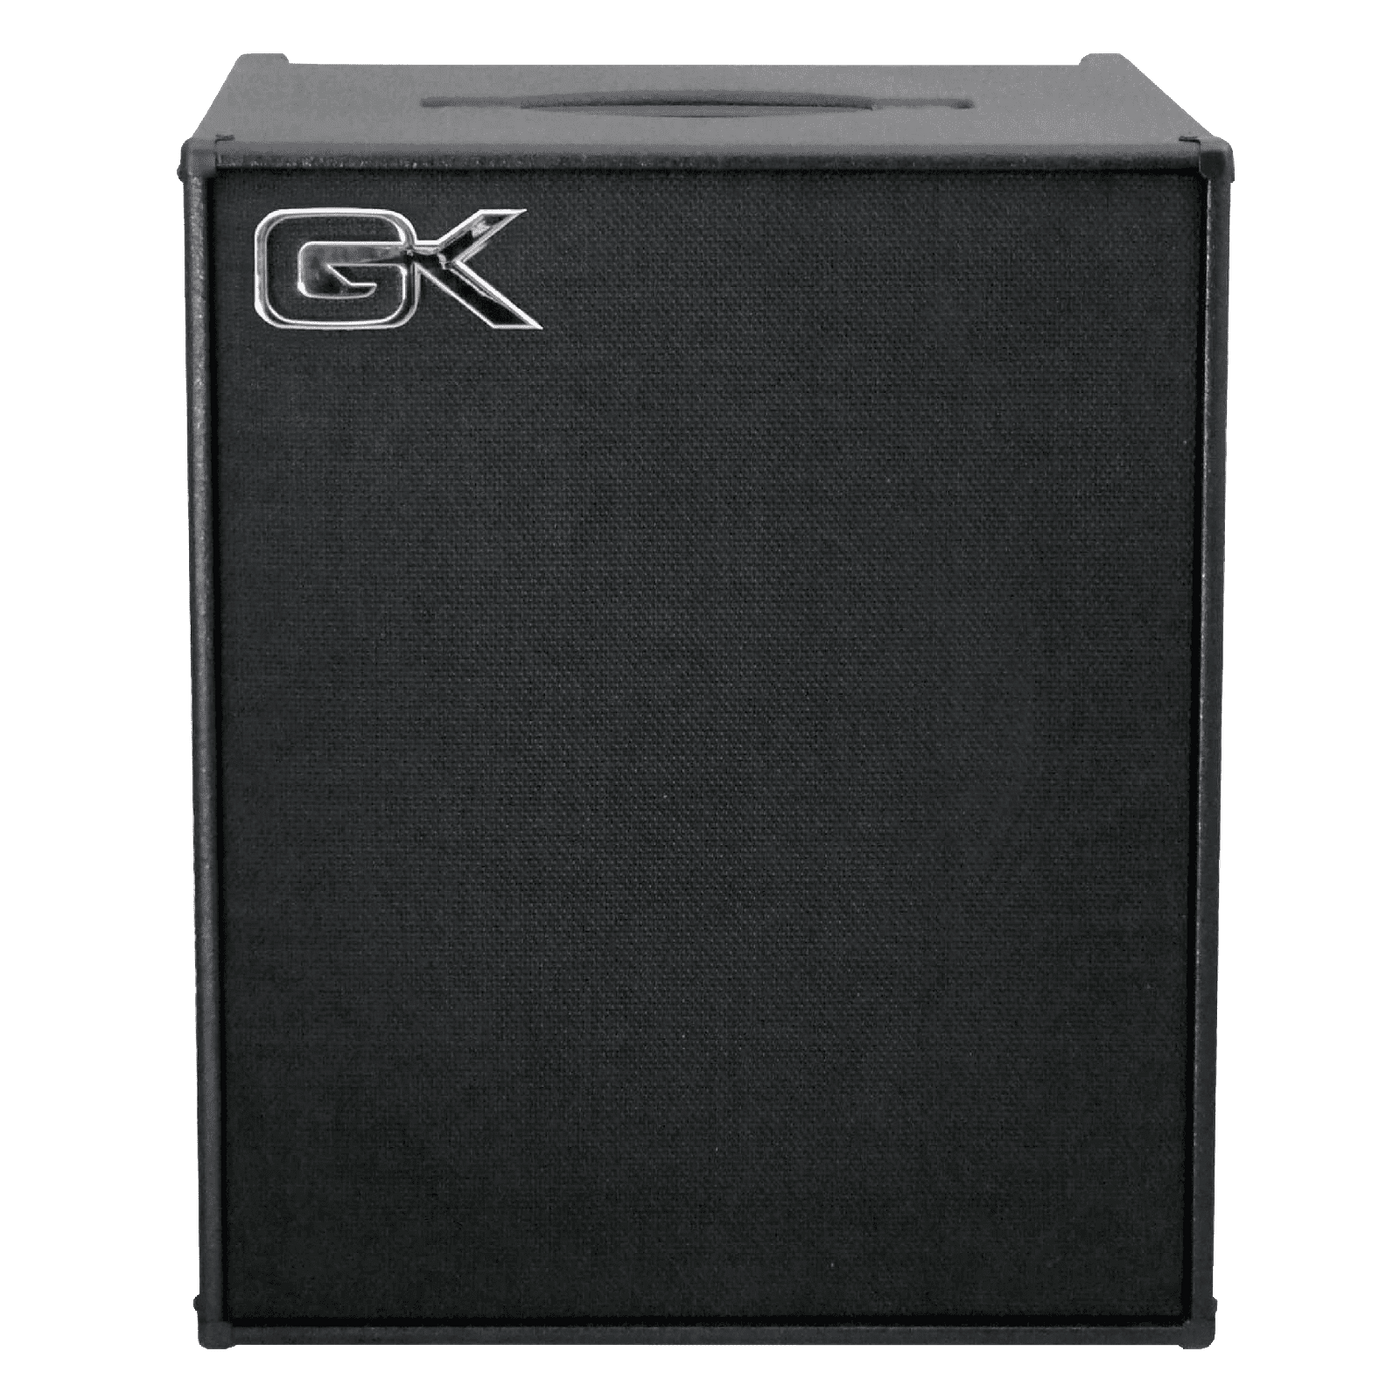 Gallien-Krueger MB 115-II - The Gallien-Krueger MB115-II is your ideal grab 'n' go bass combo amp. G-K's MB II Series combos sport ultra-efficient digital power plants, making them unbelievably lightweight. Another cool innovation is G-K's Chain Out, whic